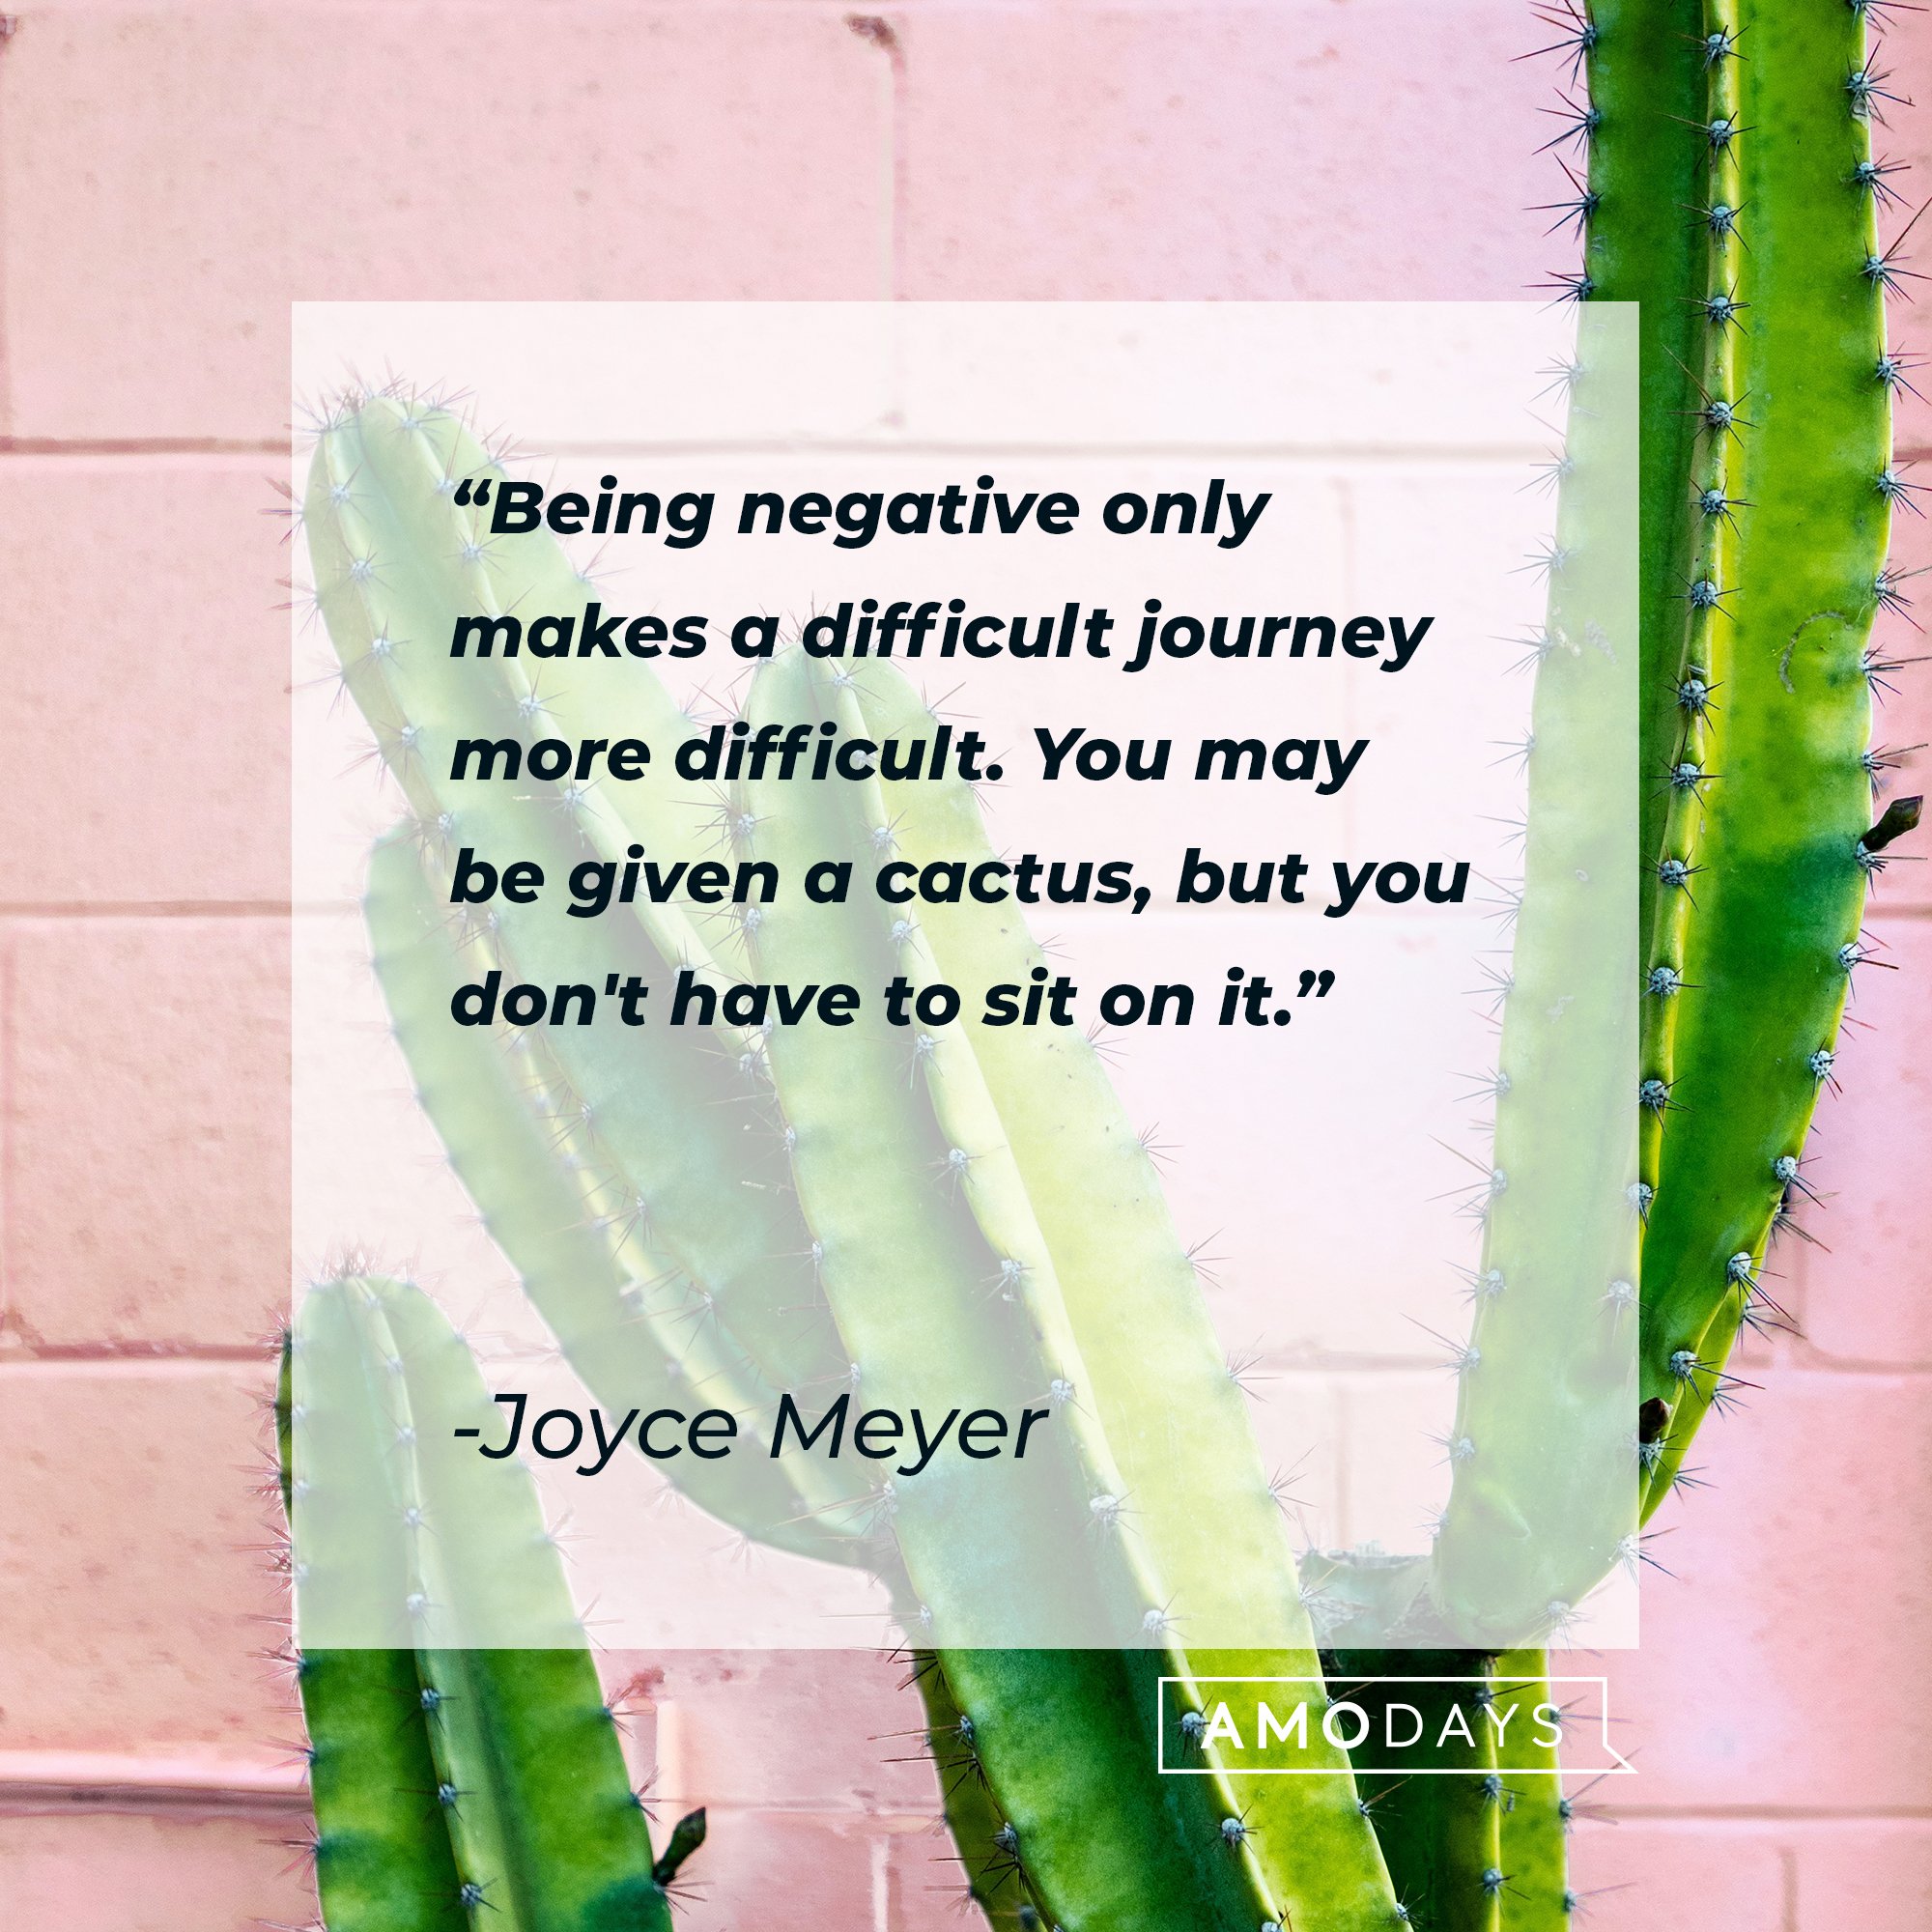 Joyce Meyer’s quote: “Being negative only makes a difficult journey more difficult. You may be given a cactus, but you don't have to sit on it."  | Image: AmoDays  